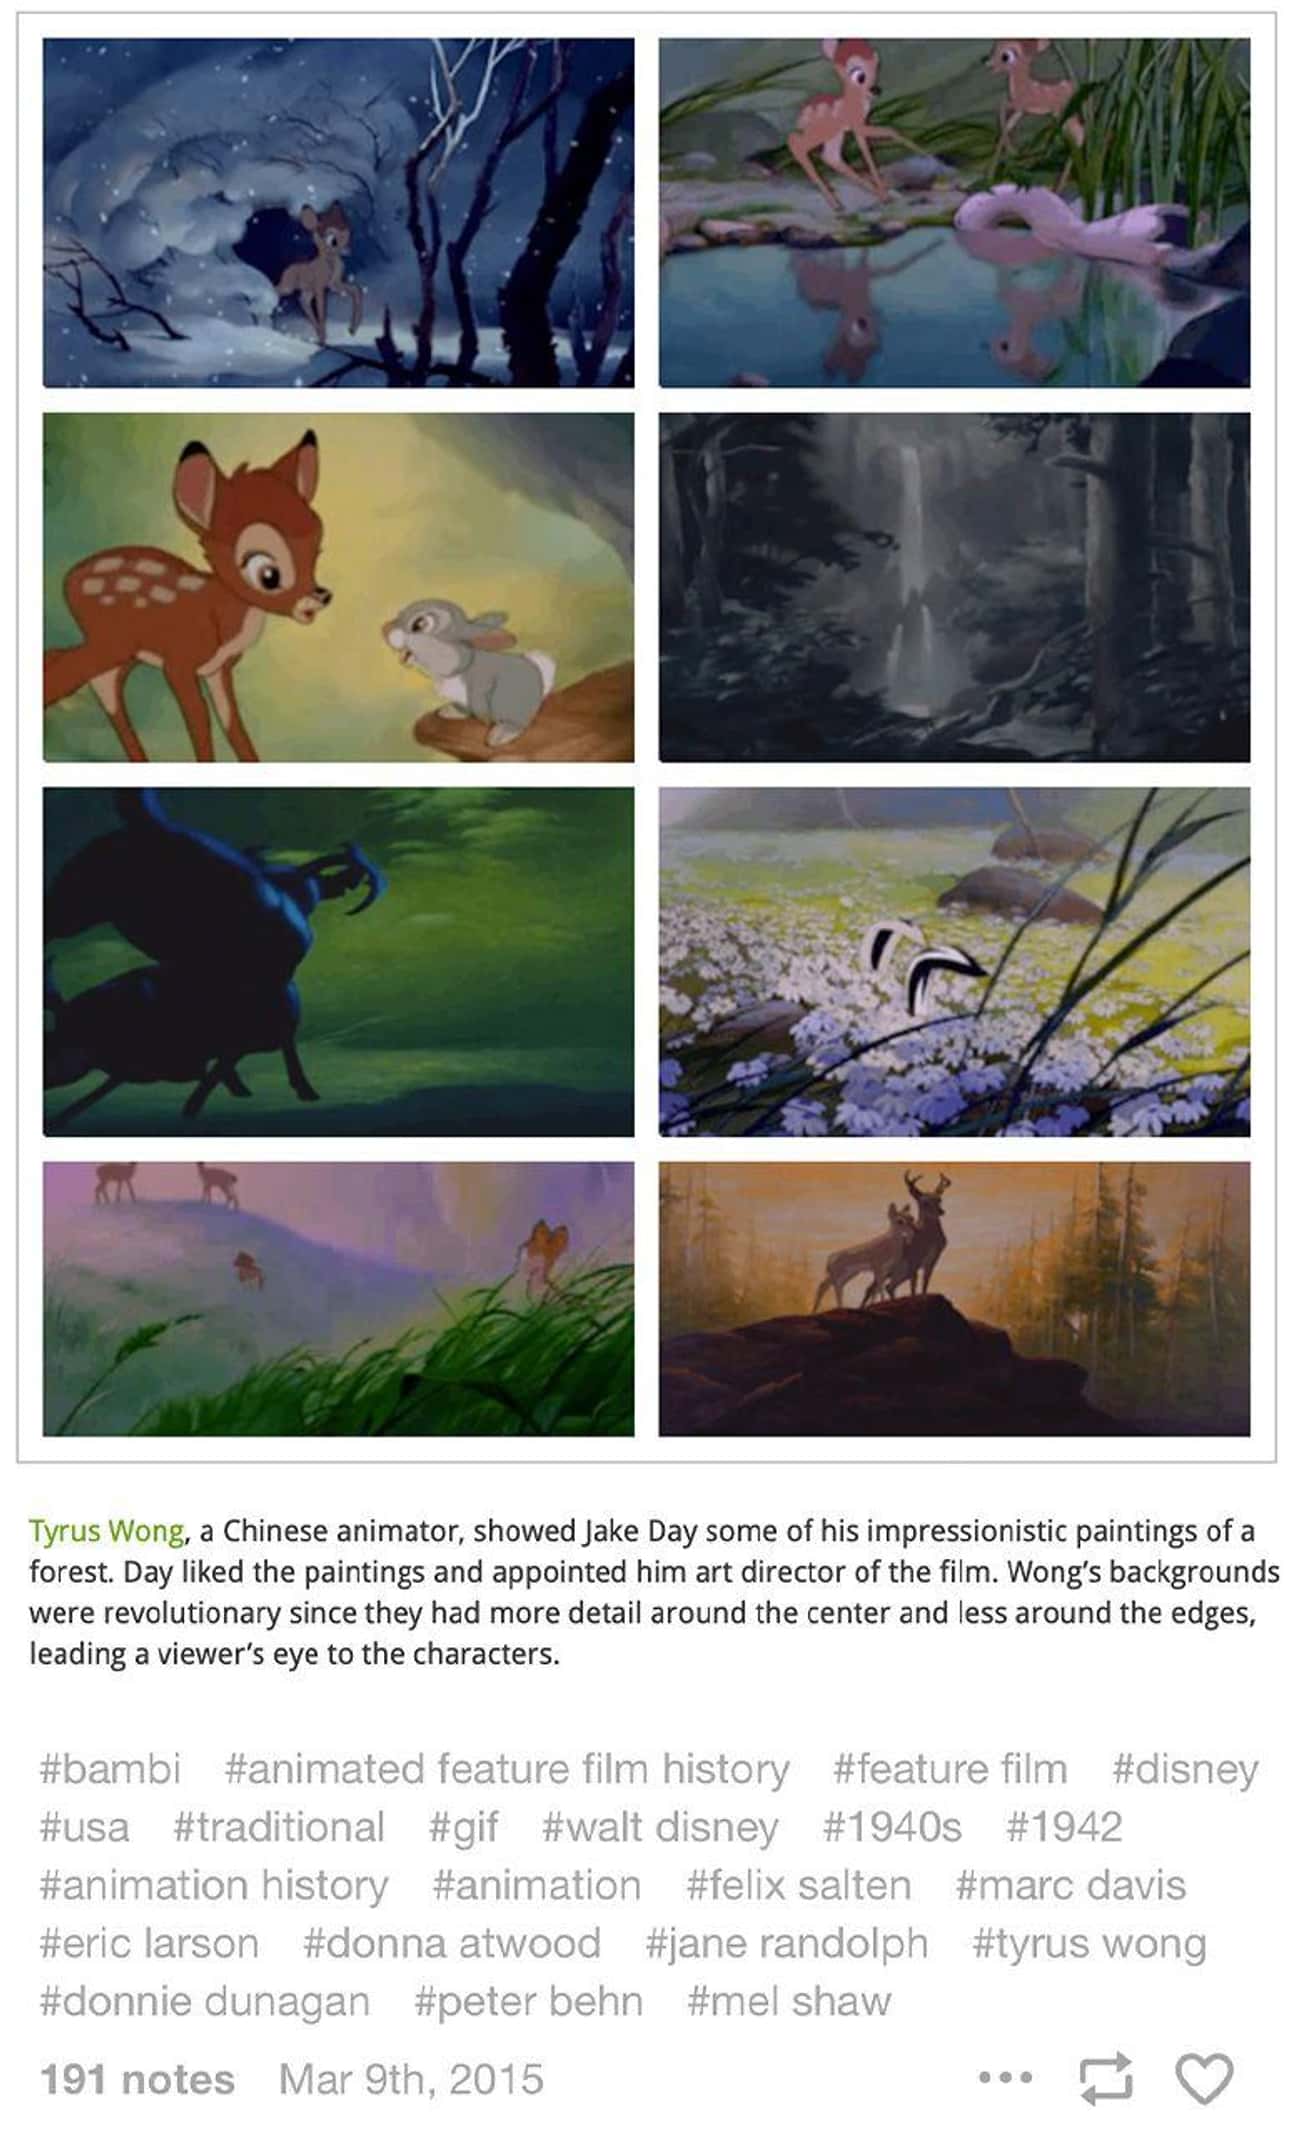 Animators Used Impressionistic Paintings Create The Forest In 'Bambi'